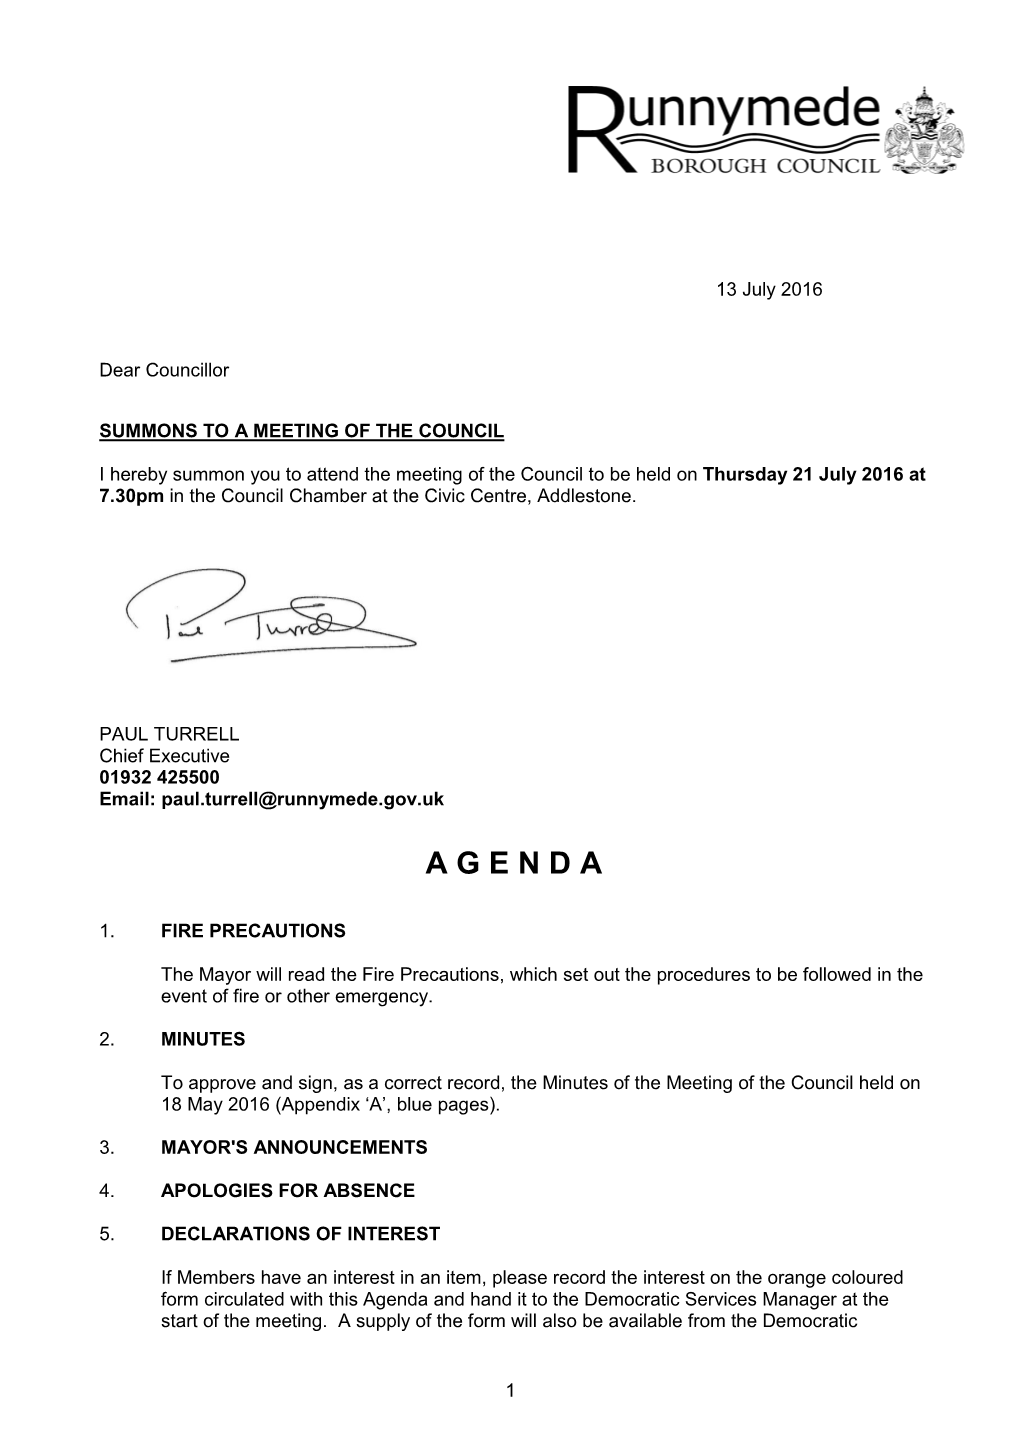 Council Meeting Summons 13 July 2016